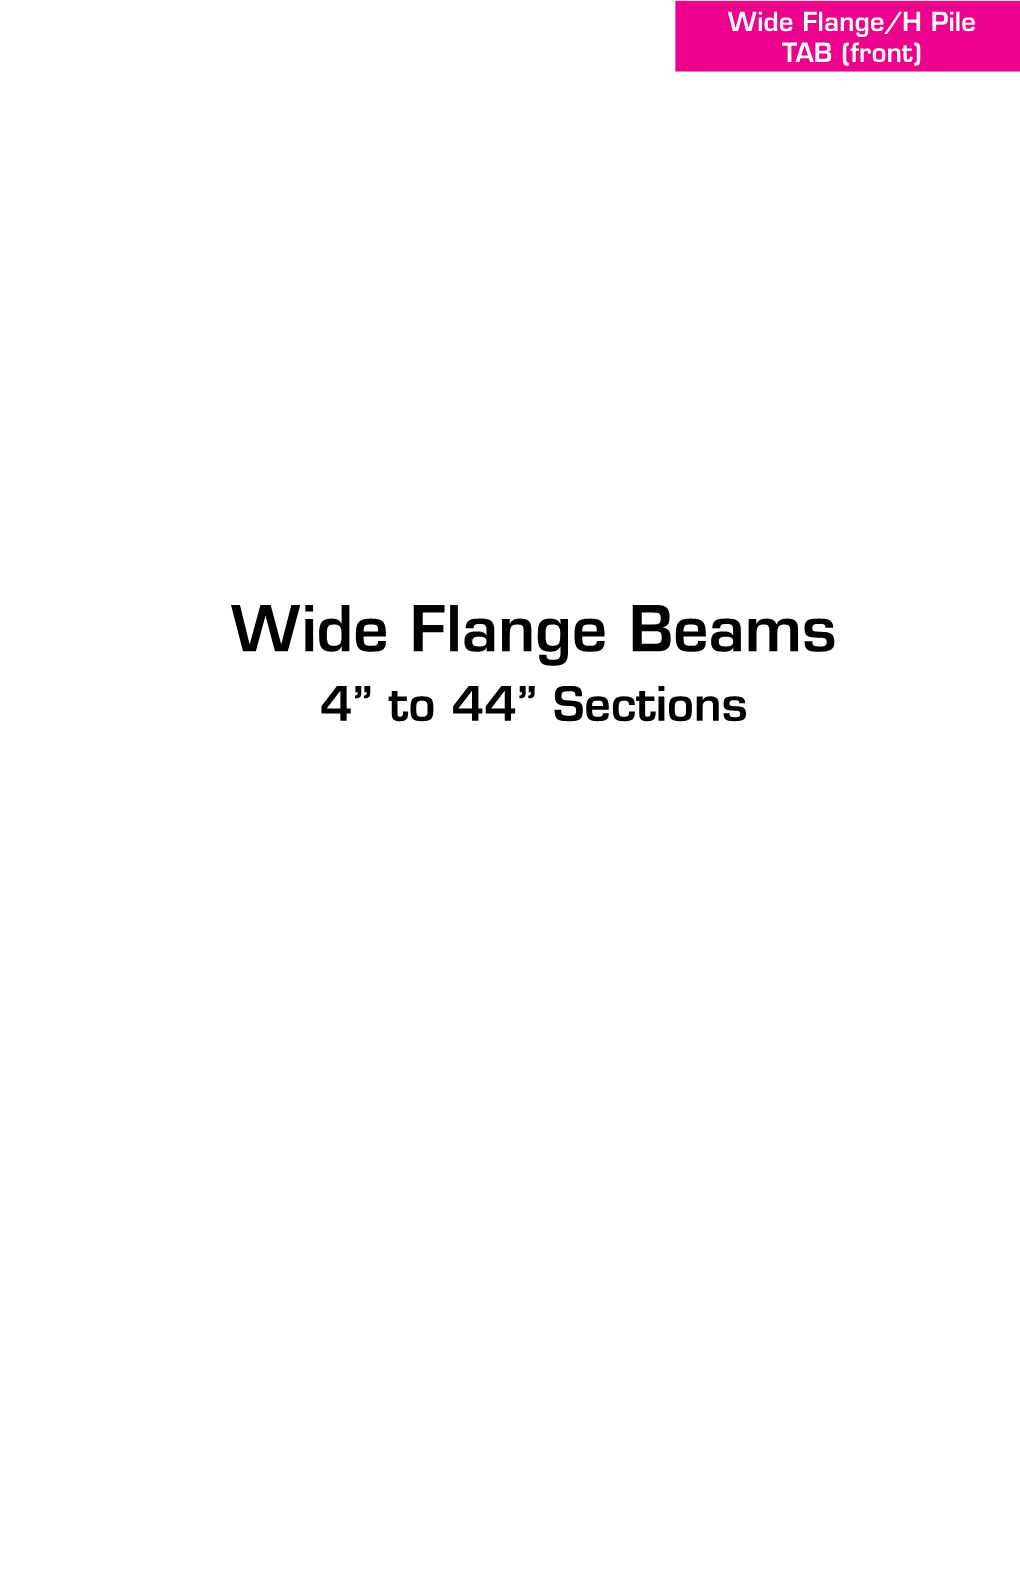 Wide Flange Beams 4” to 44” Sections Wide Flange/H Pile Wide Flange/H Pile TAB (Front) TAB (Back)